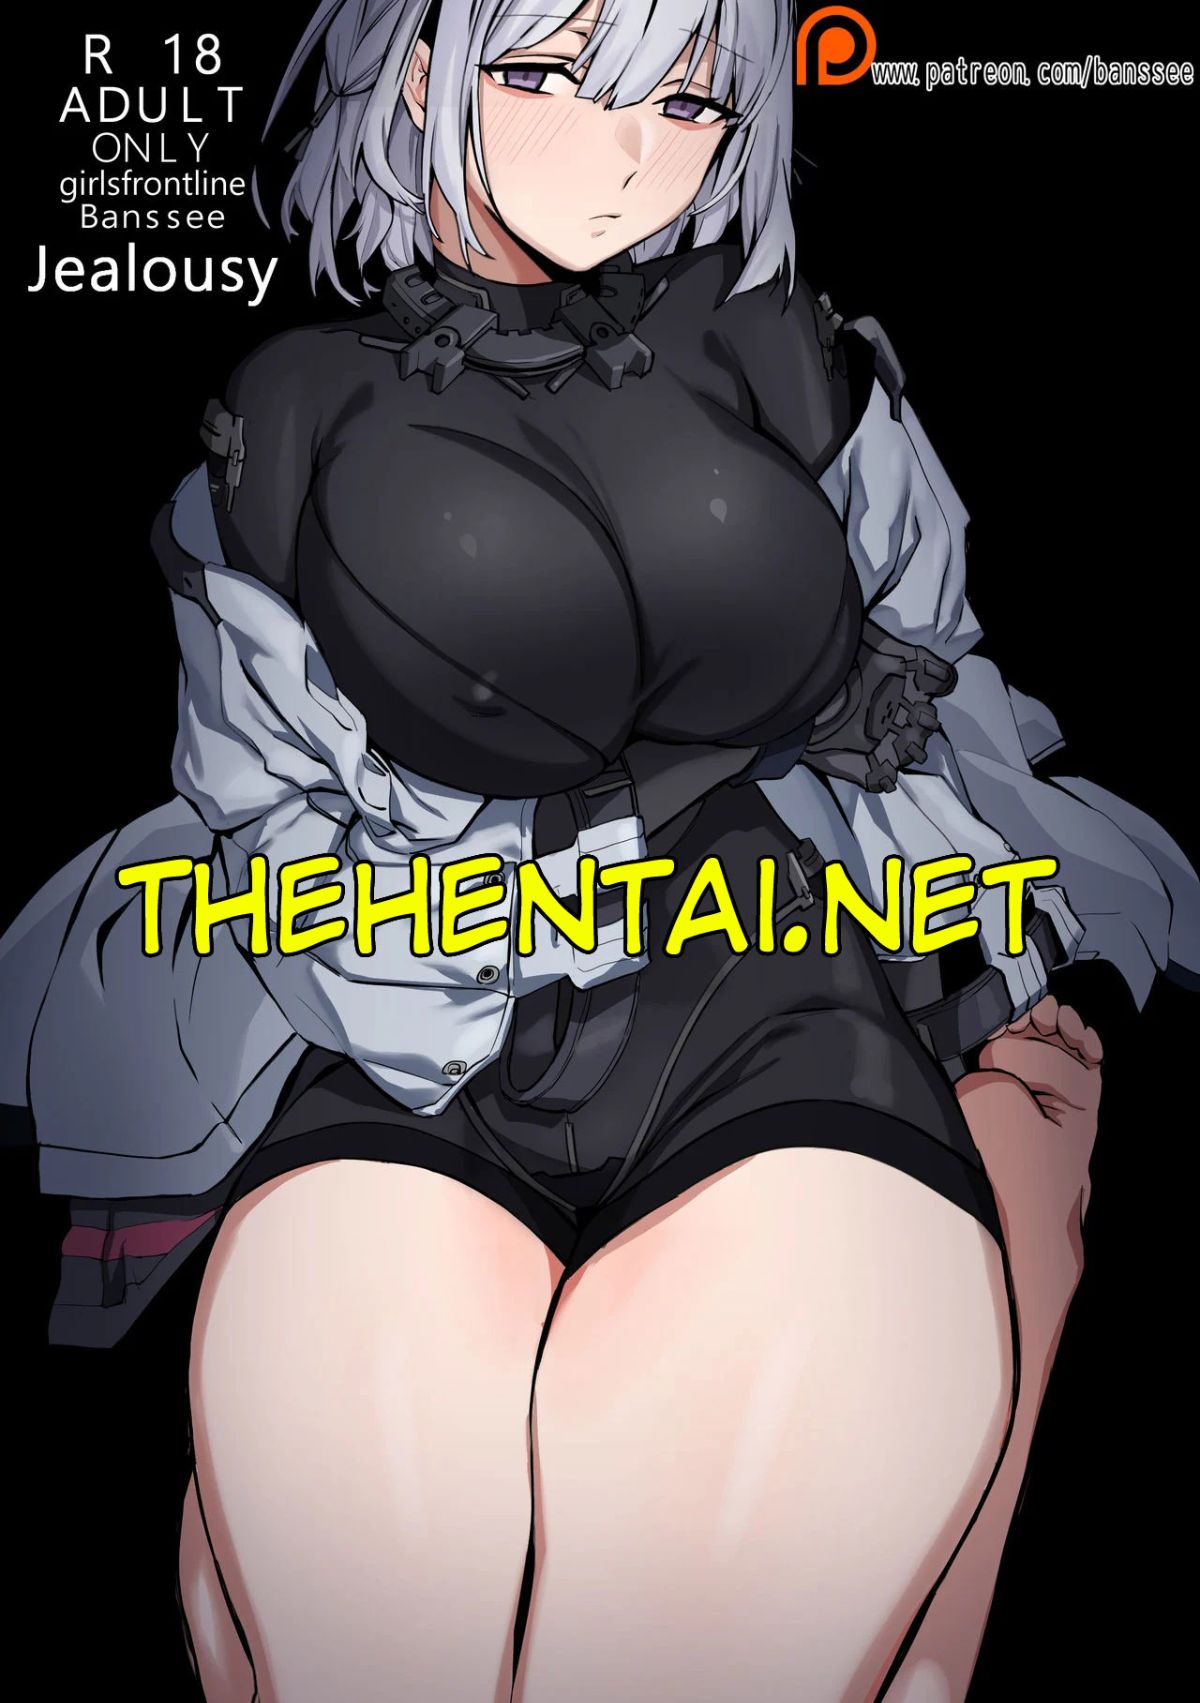 Jealousy by Banssee Hentai pt-br 01